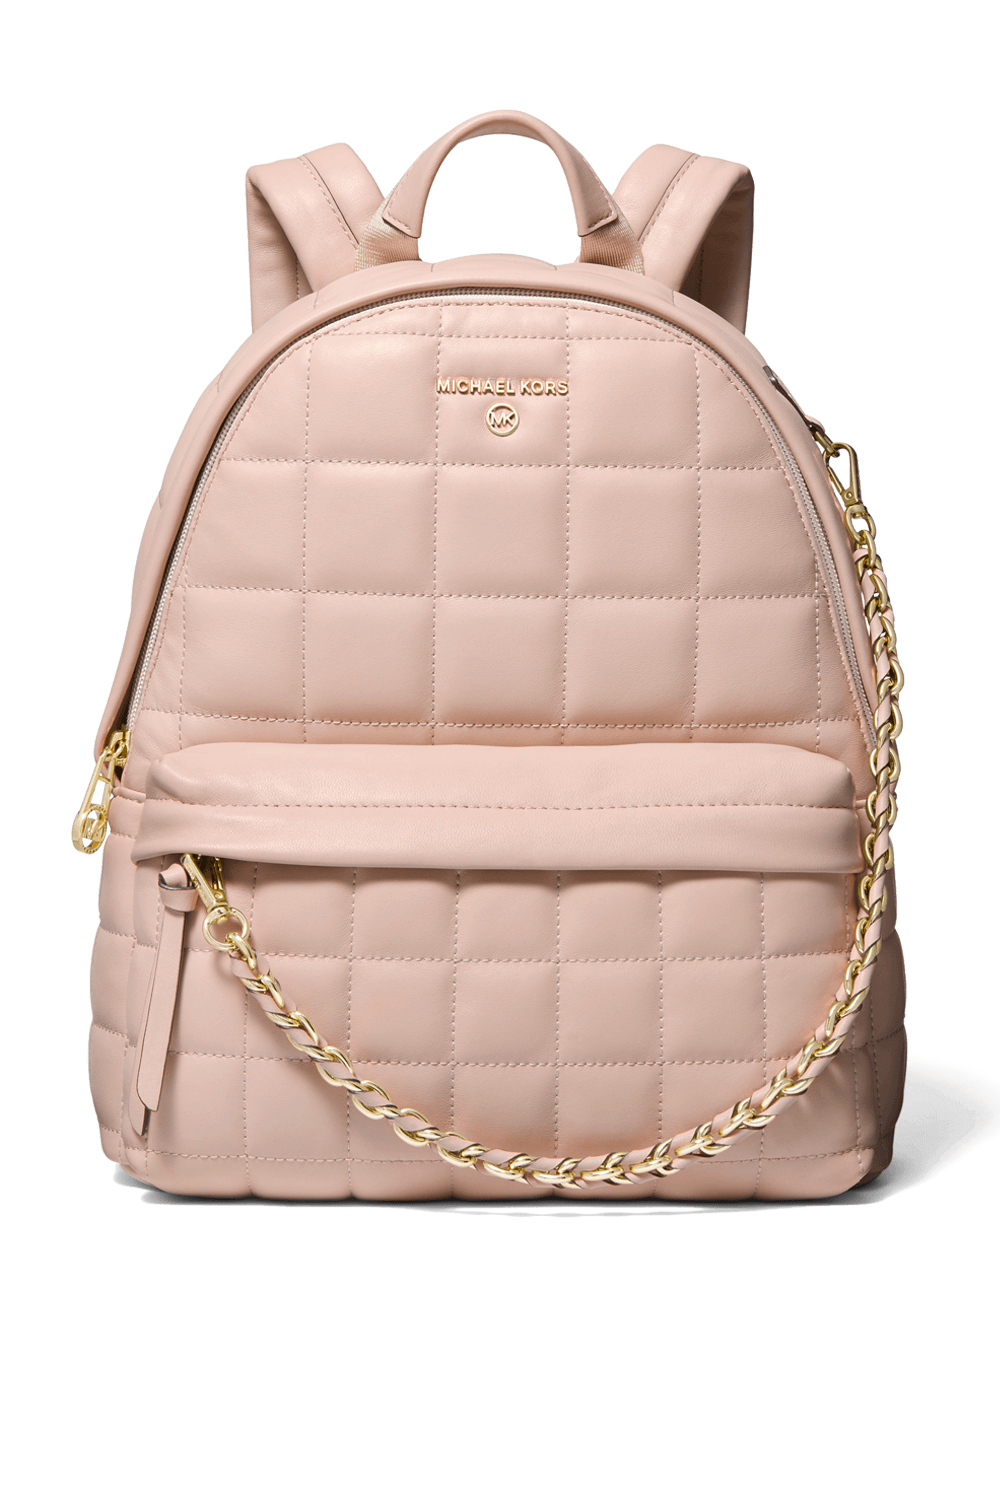 Slater MD Quilted Leather Backpack in Soft Pink MICHAEL KORS